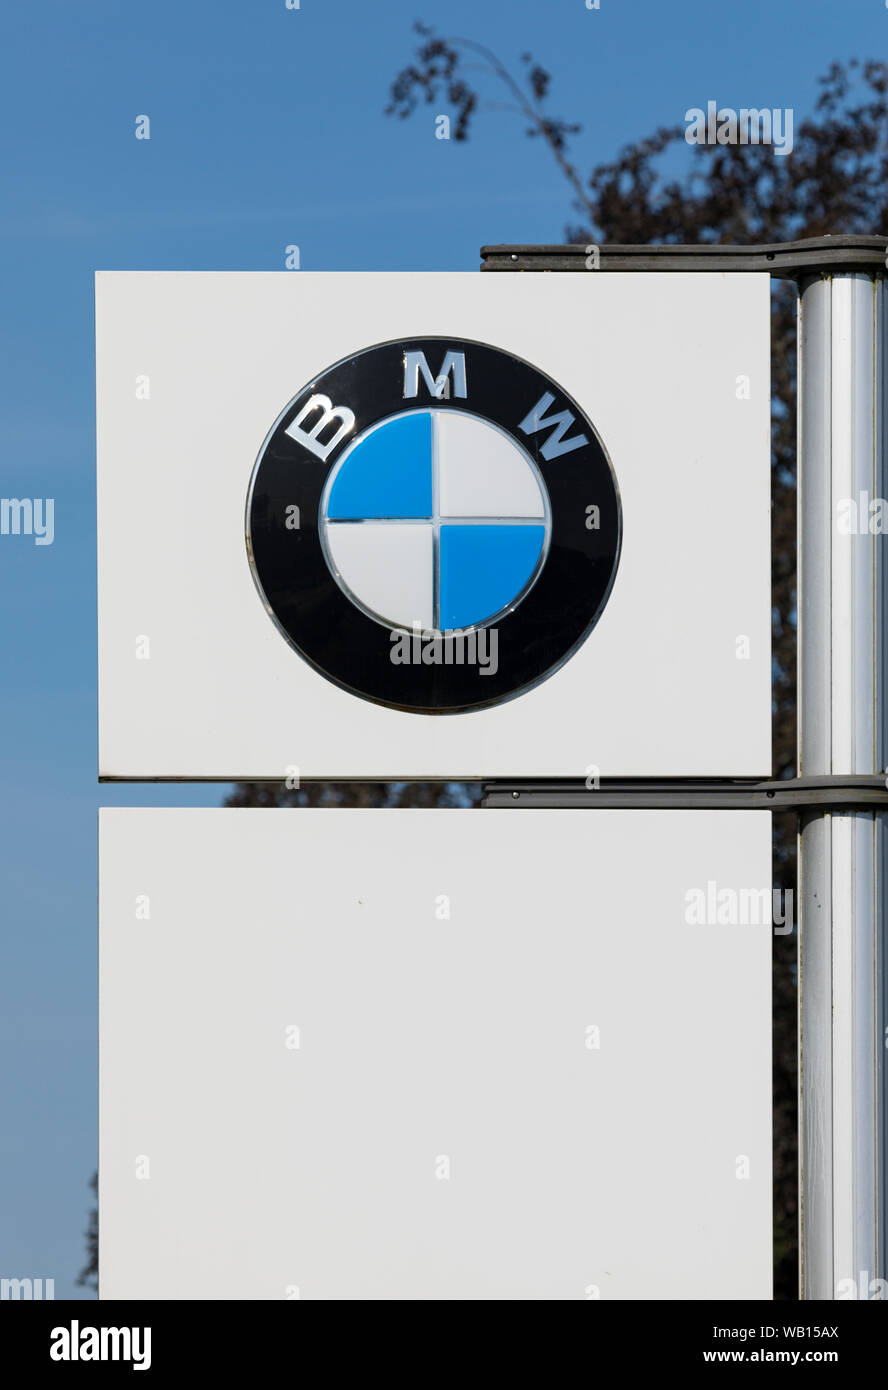 Stade, Germany - August 22, 2019: Logo on pole identifying a BMW dealership. Stock Photo